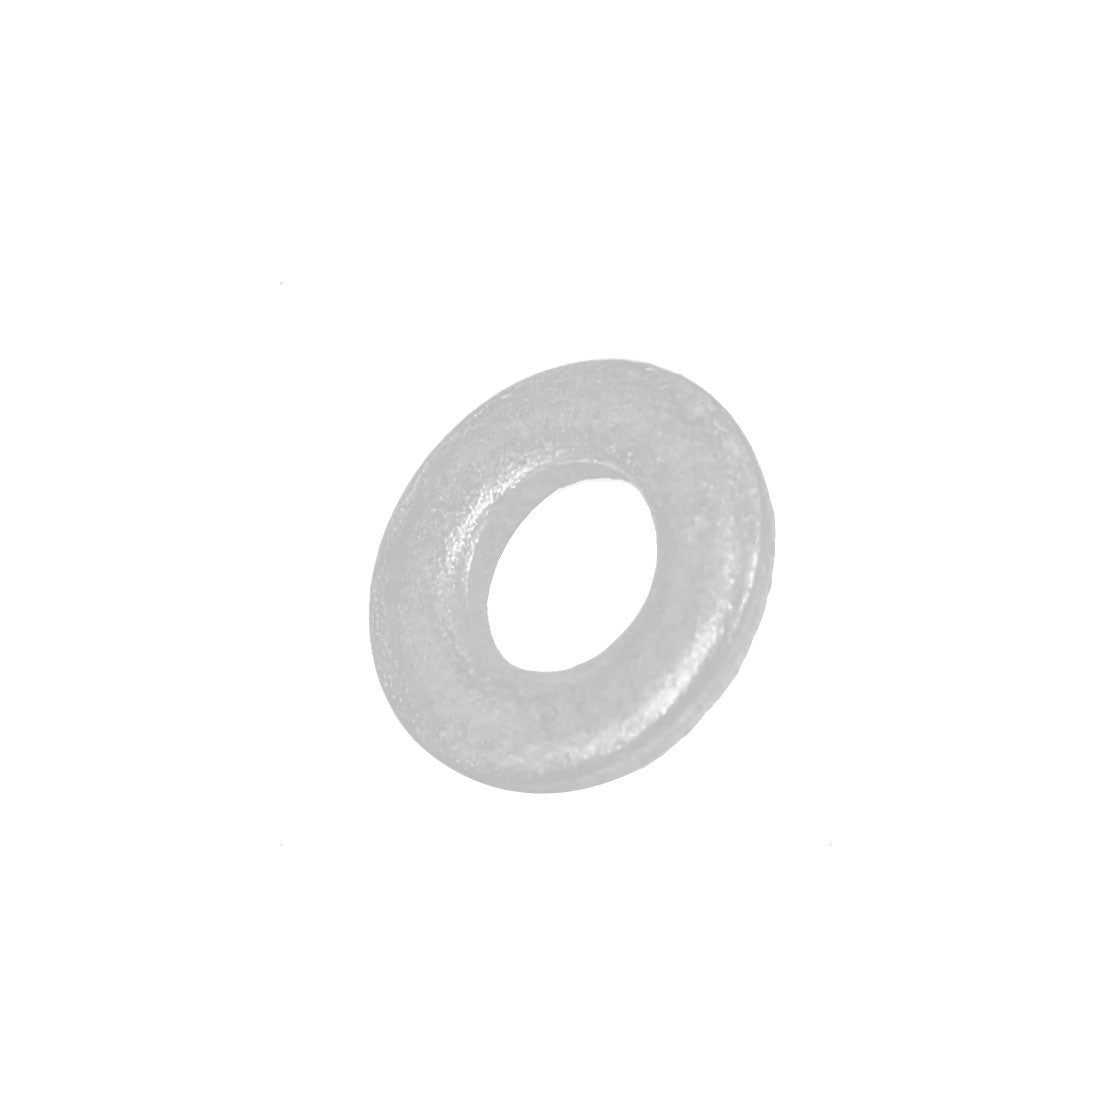 uxcell Uxcell 4mm x 9mm x 1mm Zinc Plated Flat Pads Washers Gaskets Fasteners GB97 100PCS